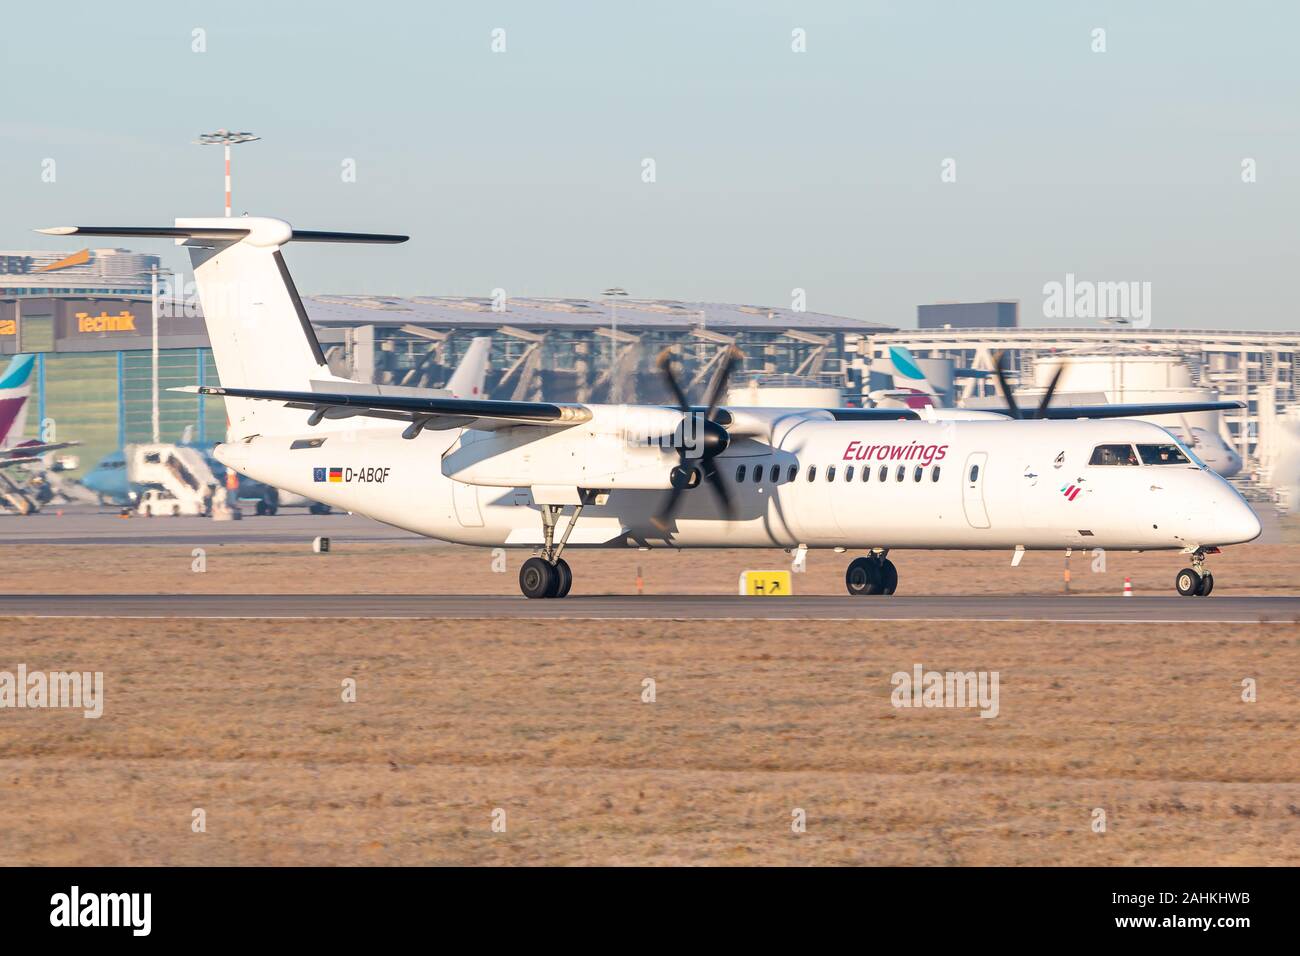 Stuttgart, Germany - December 30, 2019: Eurowings Bombardier Dash 8 airplane at Stuttgart airport (STR) in Germany. Bombardier is an aircraft manufact Stock Photo